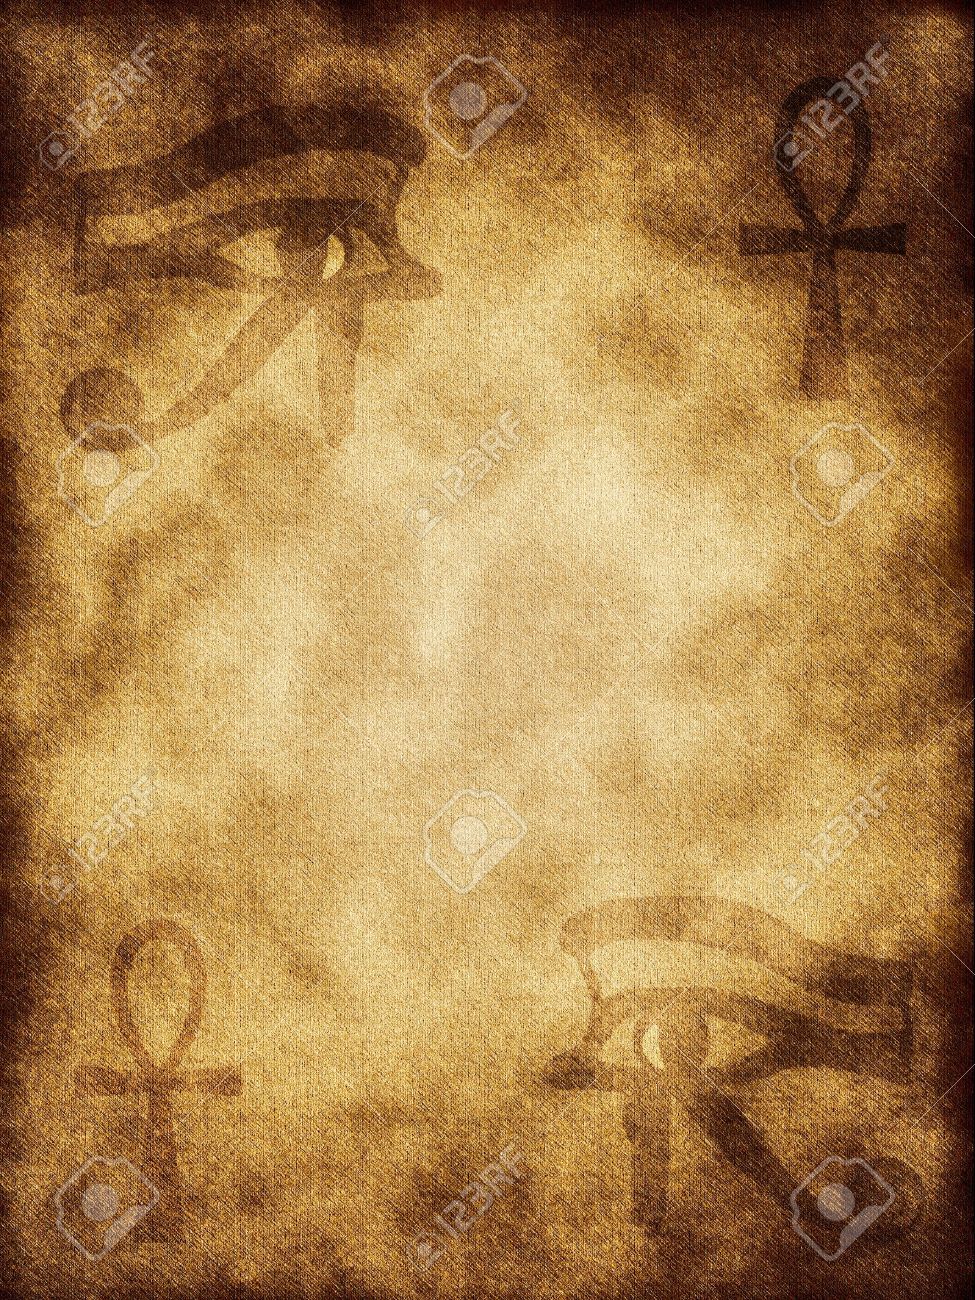 The Ancient Egyptian Symbols On Background Stock Photo Picture